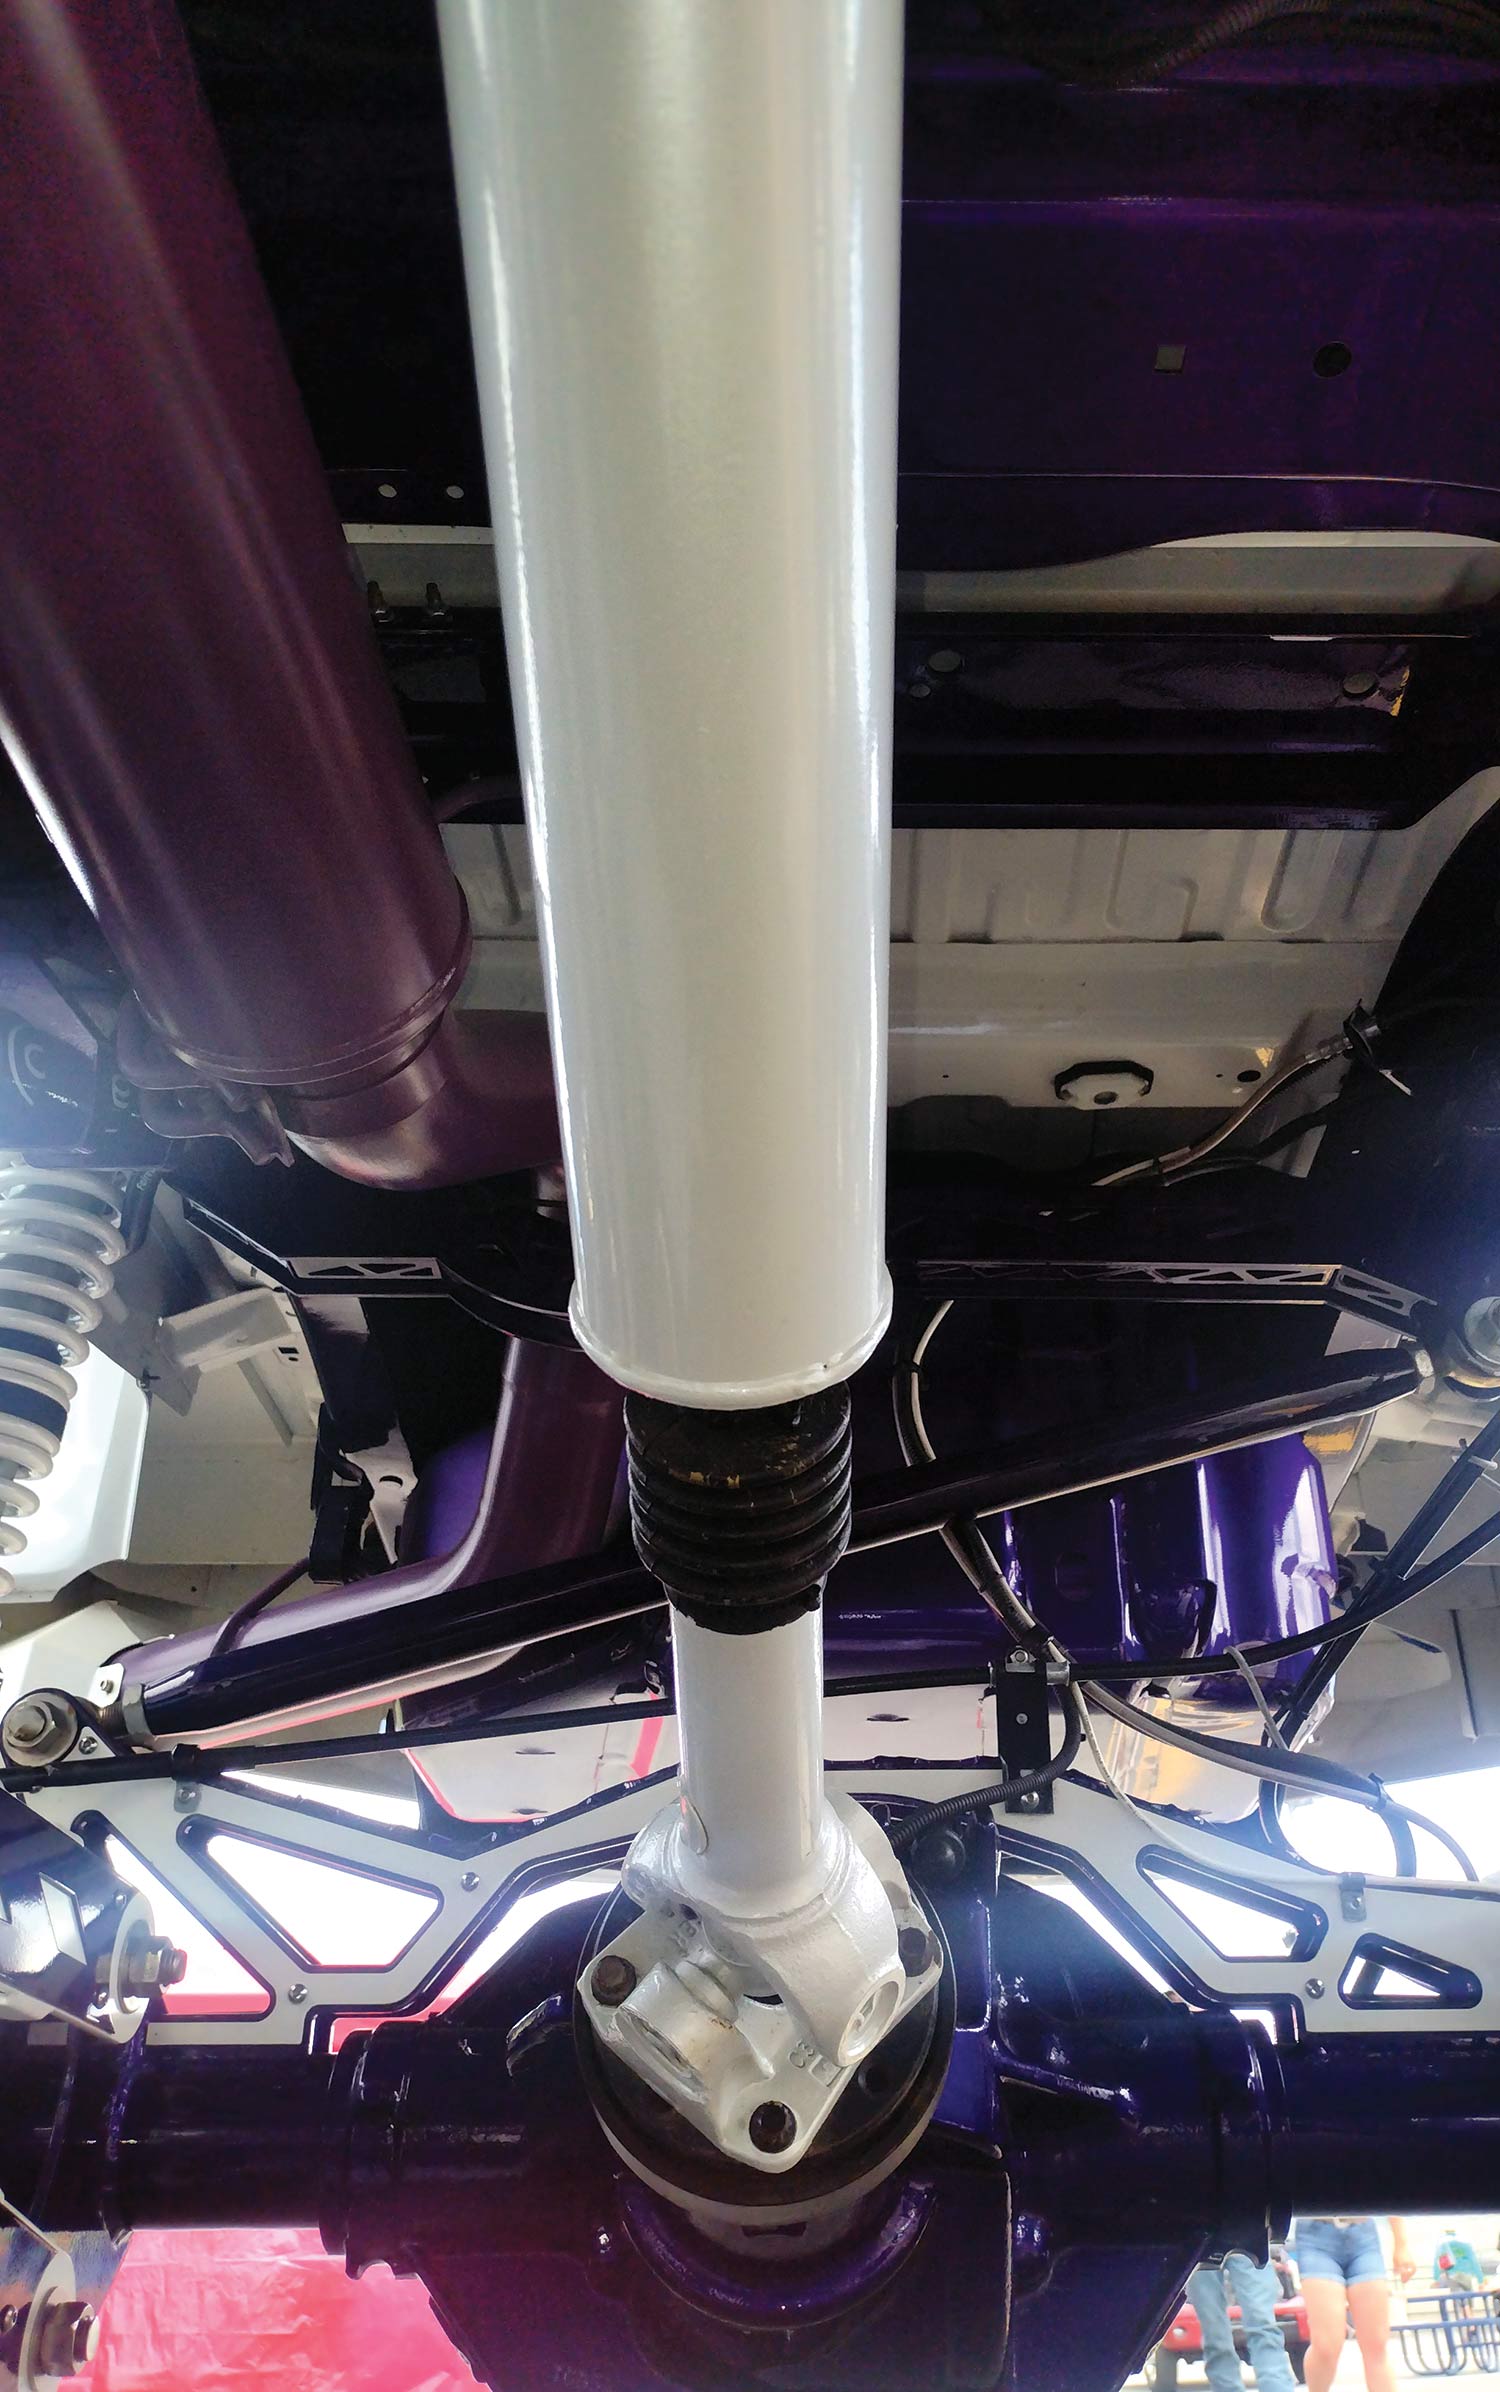 white shock absorber under the car